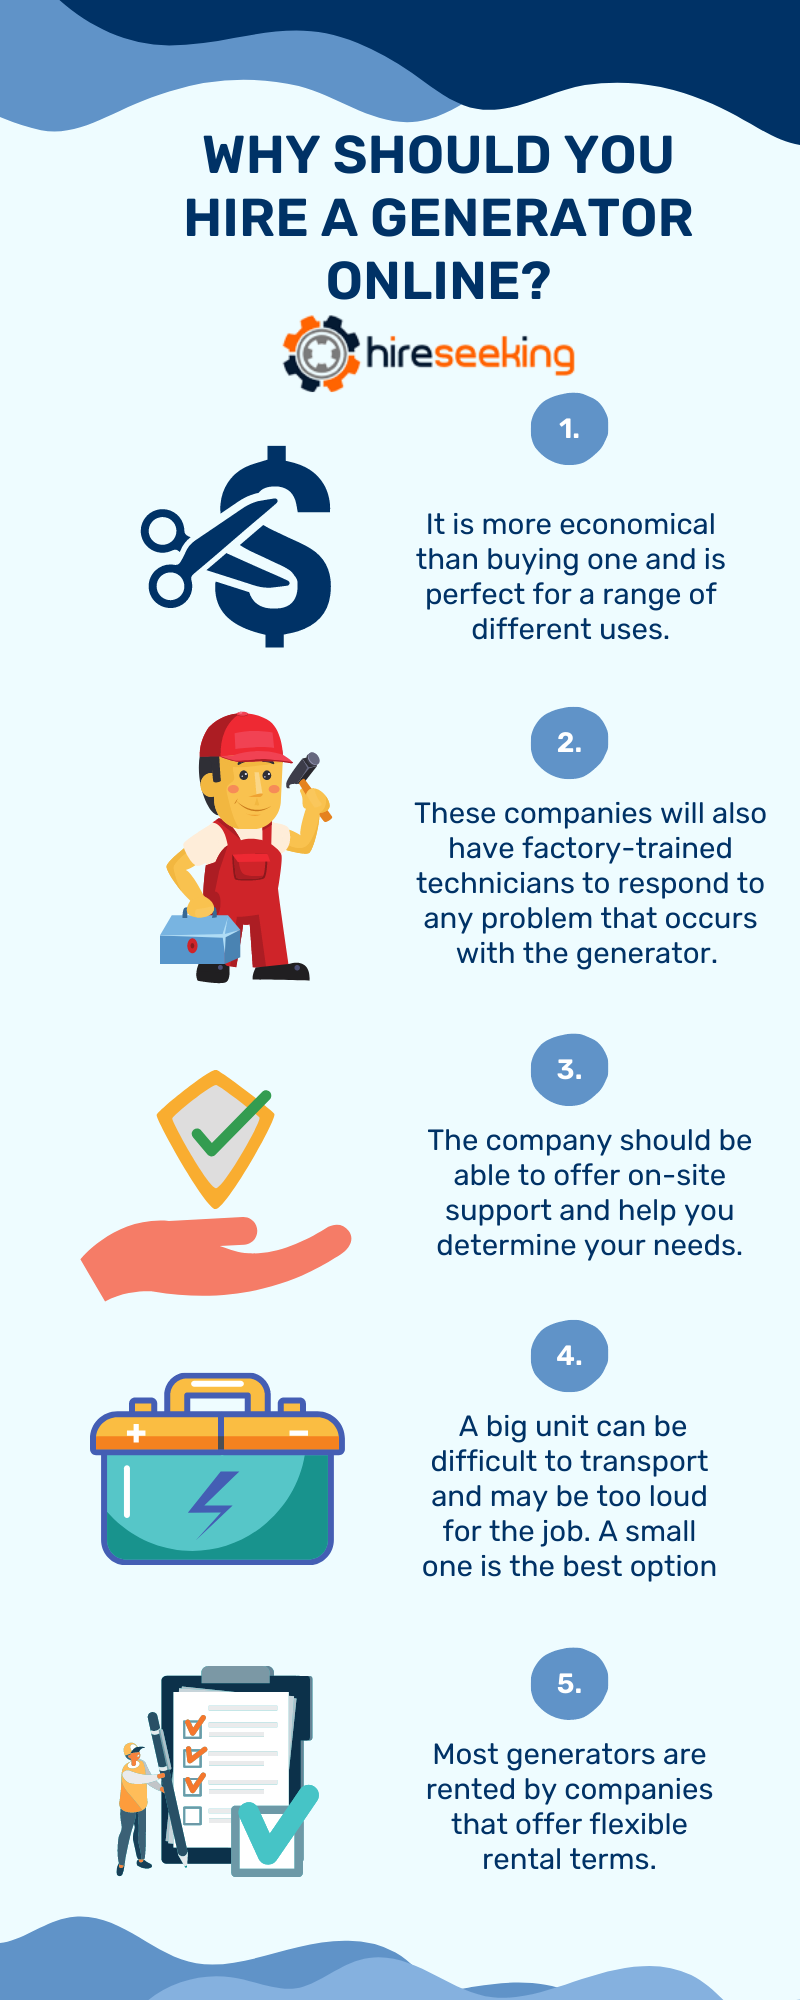 Why should YOU hire a generator online